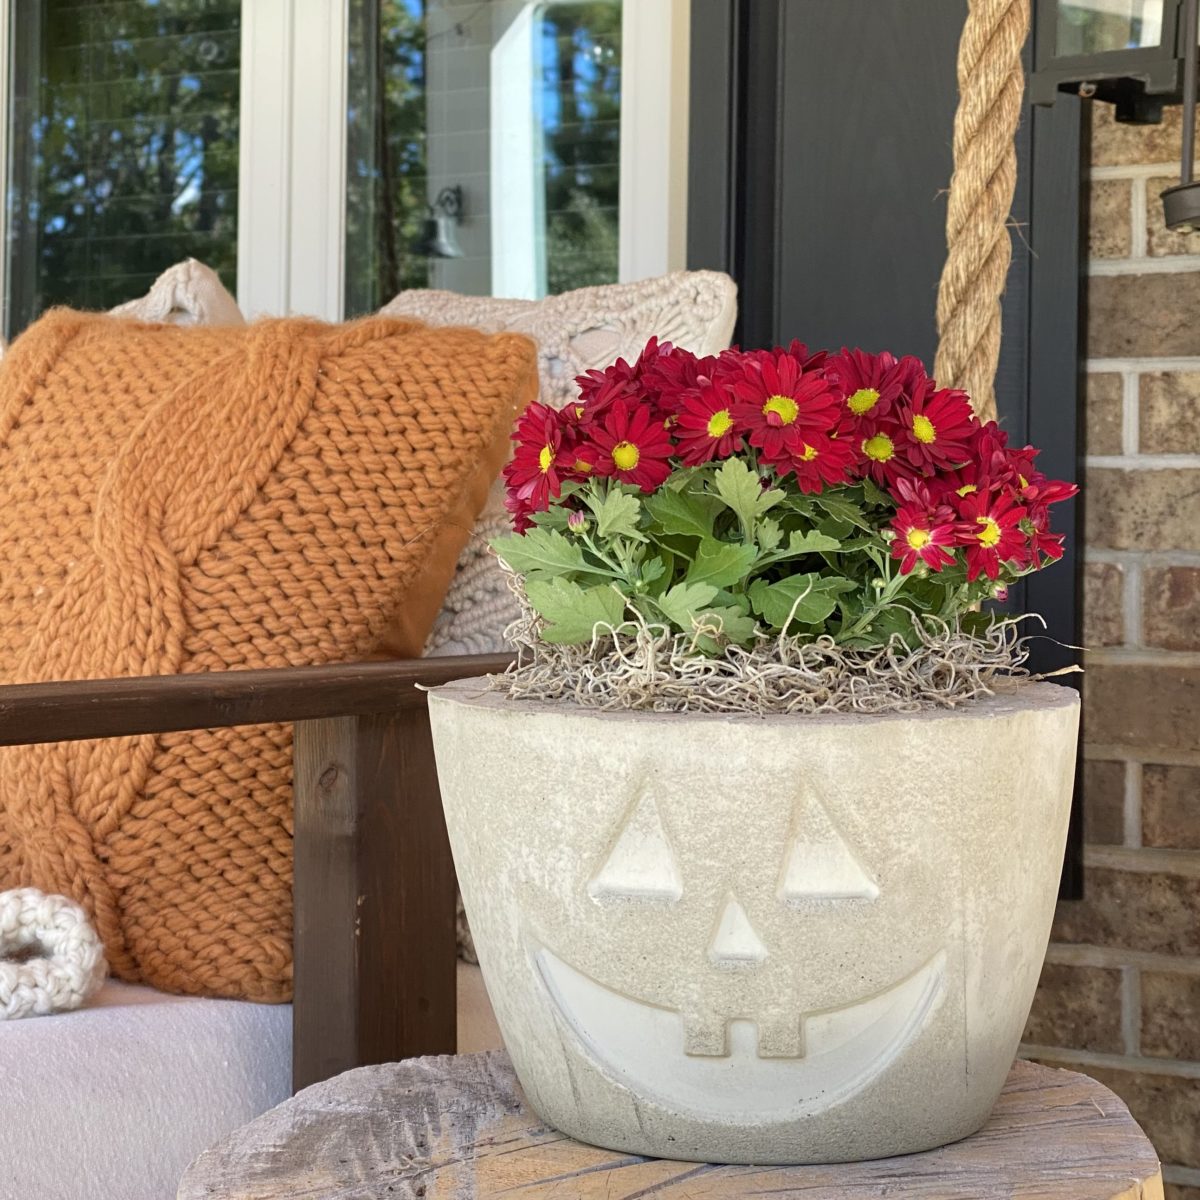 A concrete Jack O’Lantern planter with red mums in it on the porch.